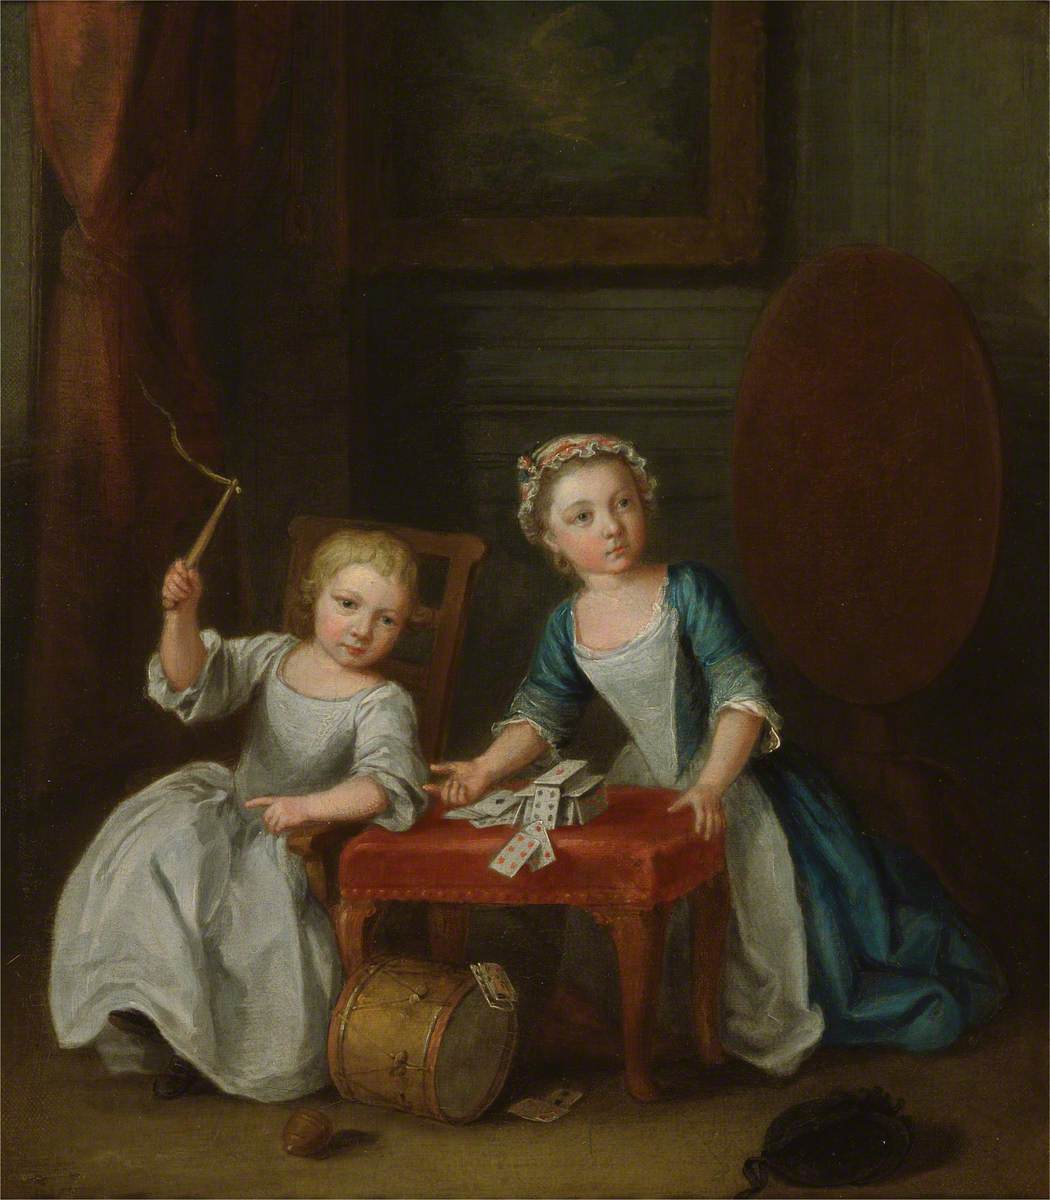 Children at Play, Probably the Artist's Son Jacobus and Daughter Maria Joanna Sophia